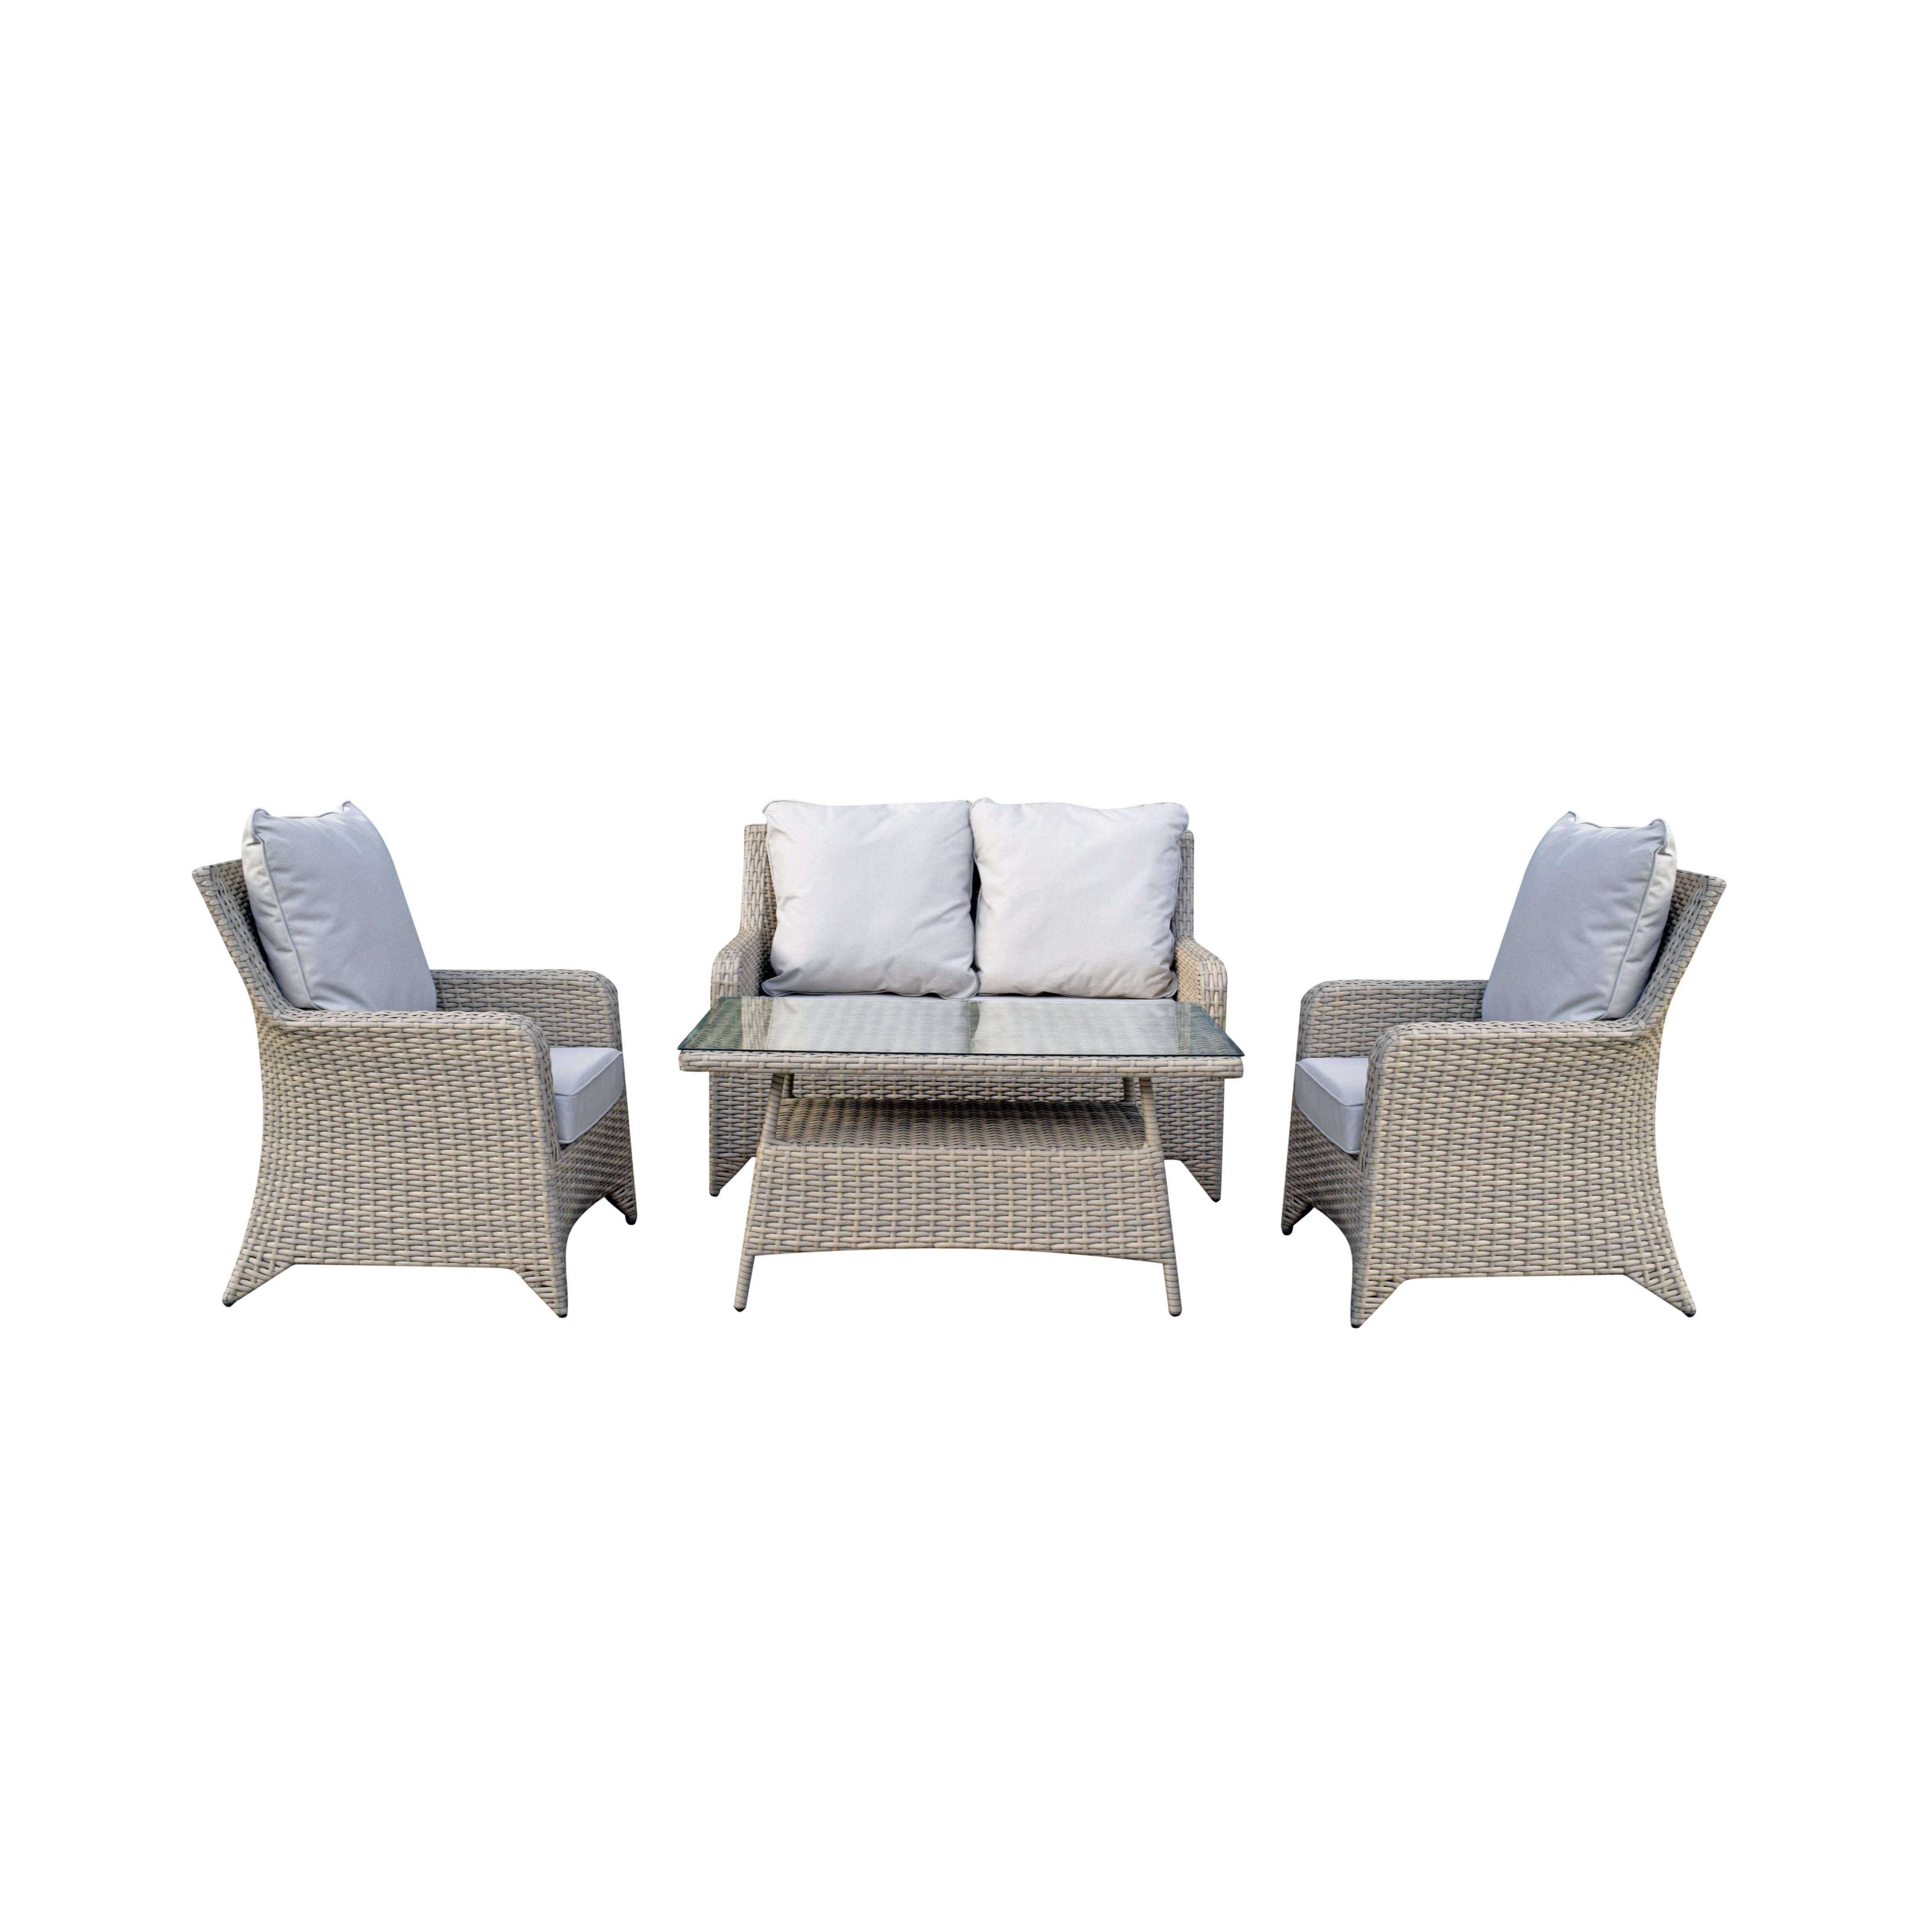 Exceptional Garden:Signature Weave Sarah 4-Seater Sofa Set with New Coffee Table Design - Nature